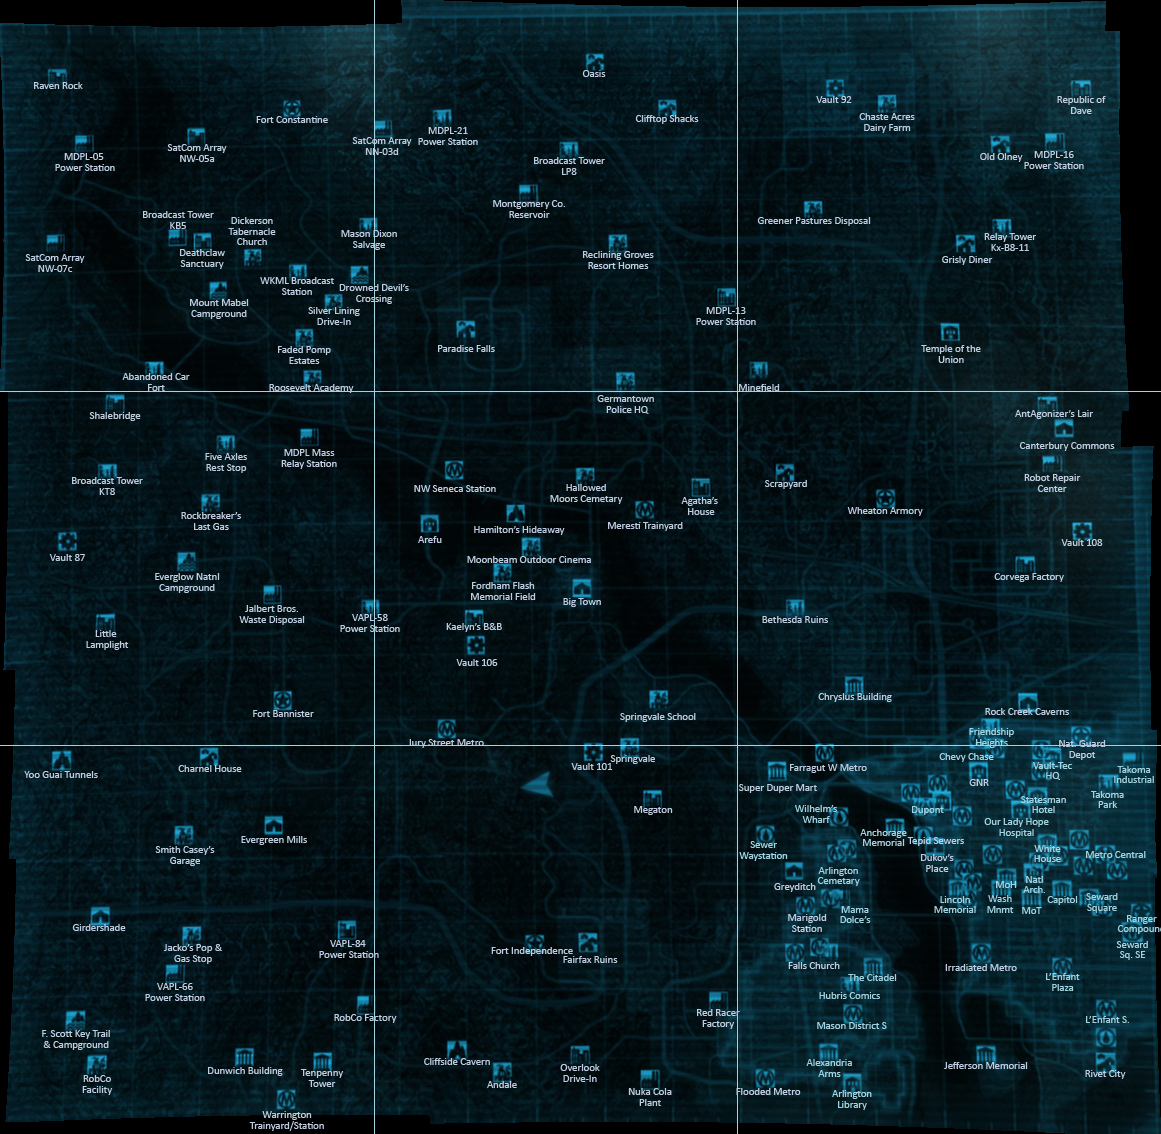 Fallout 3: Sector 1, sector 2, maps of the world